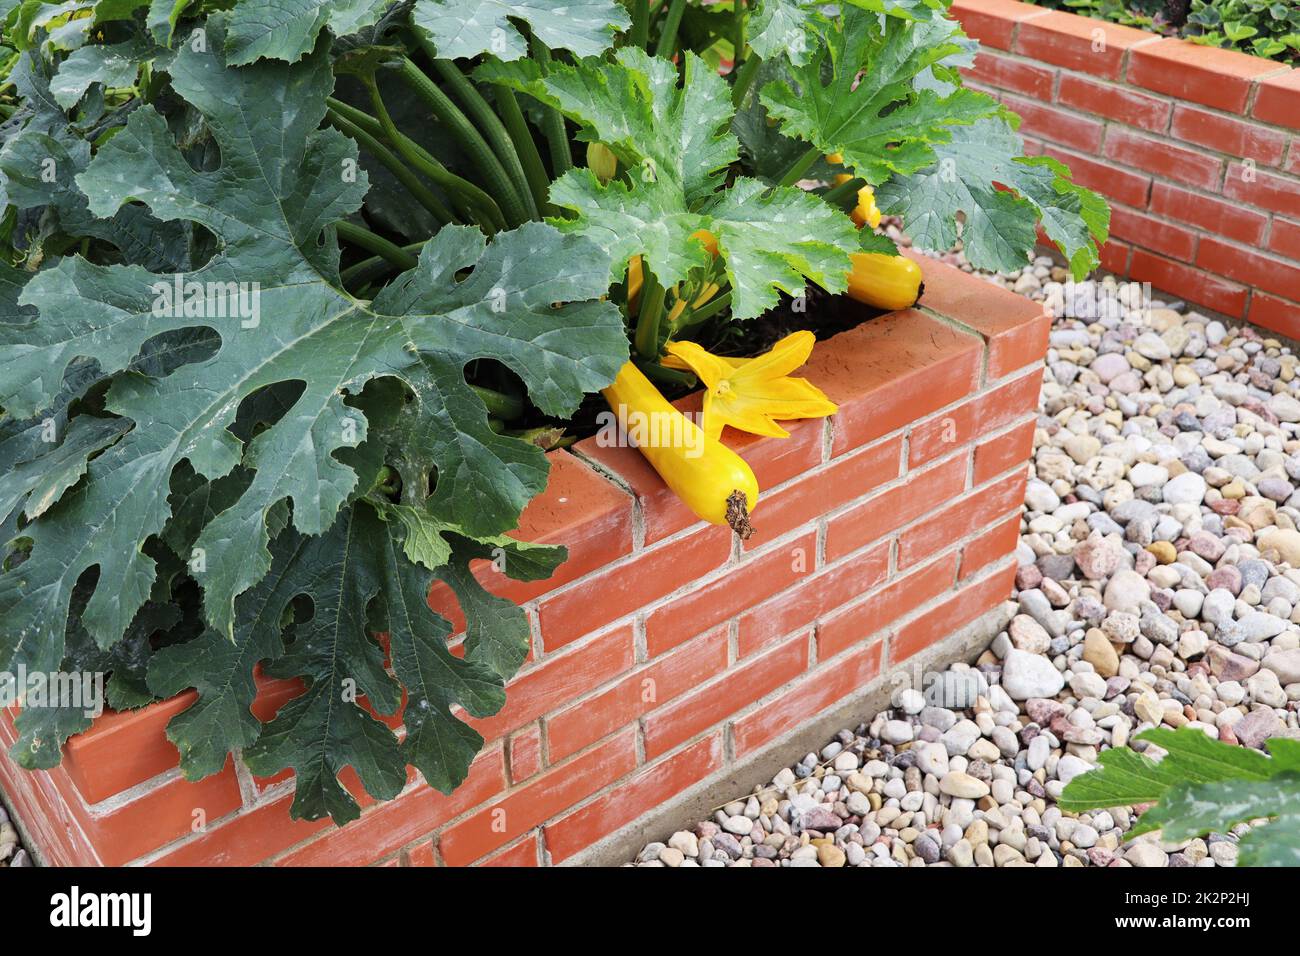 A modern vegetable garden with raised briks beds . .Raised beds gardening in an urban garden growing plants, herbs, spices, berries and vegetables, zucchini harvest Stock Photo